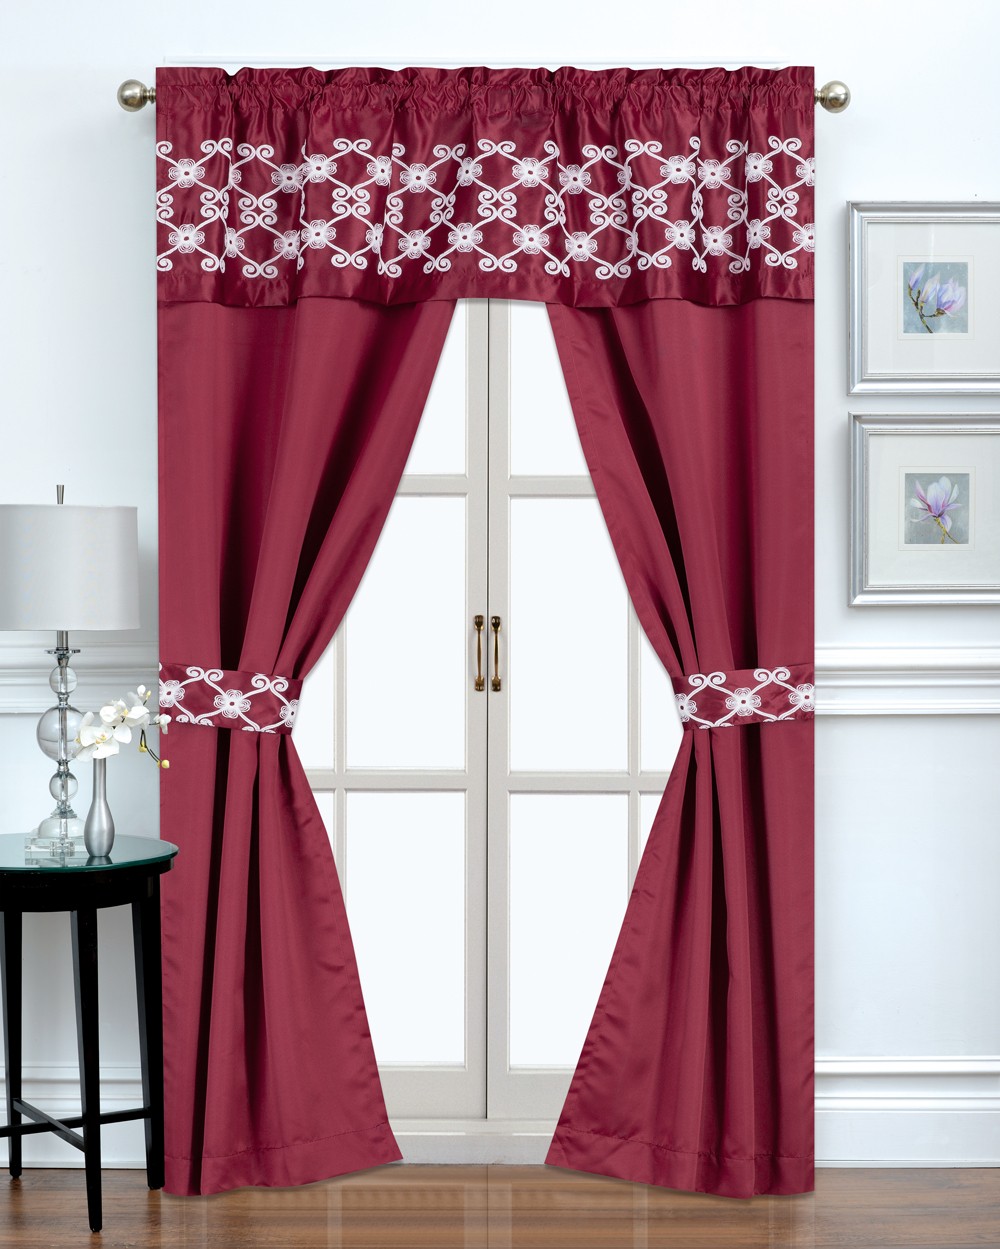 Regal home collections panels with attached valances